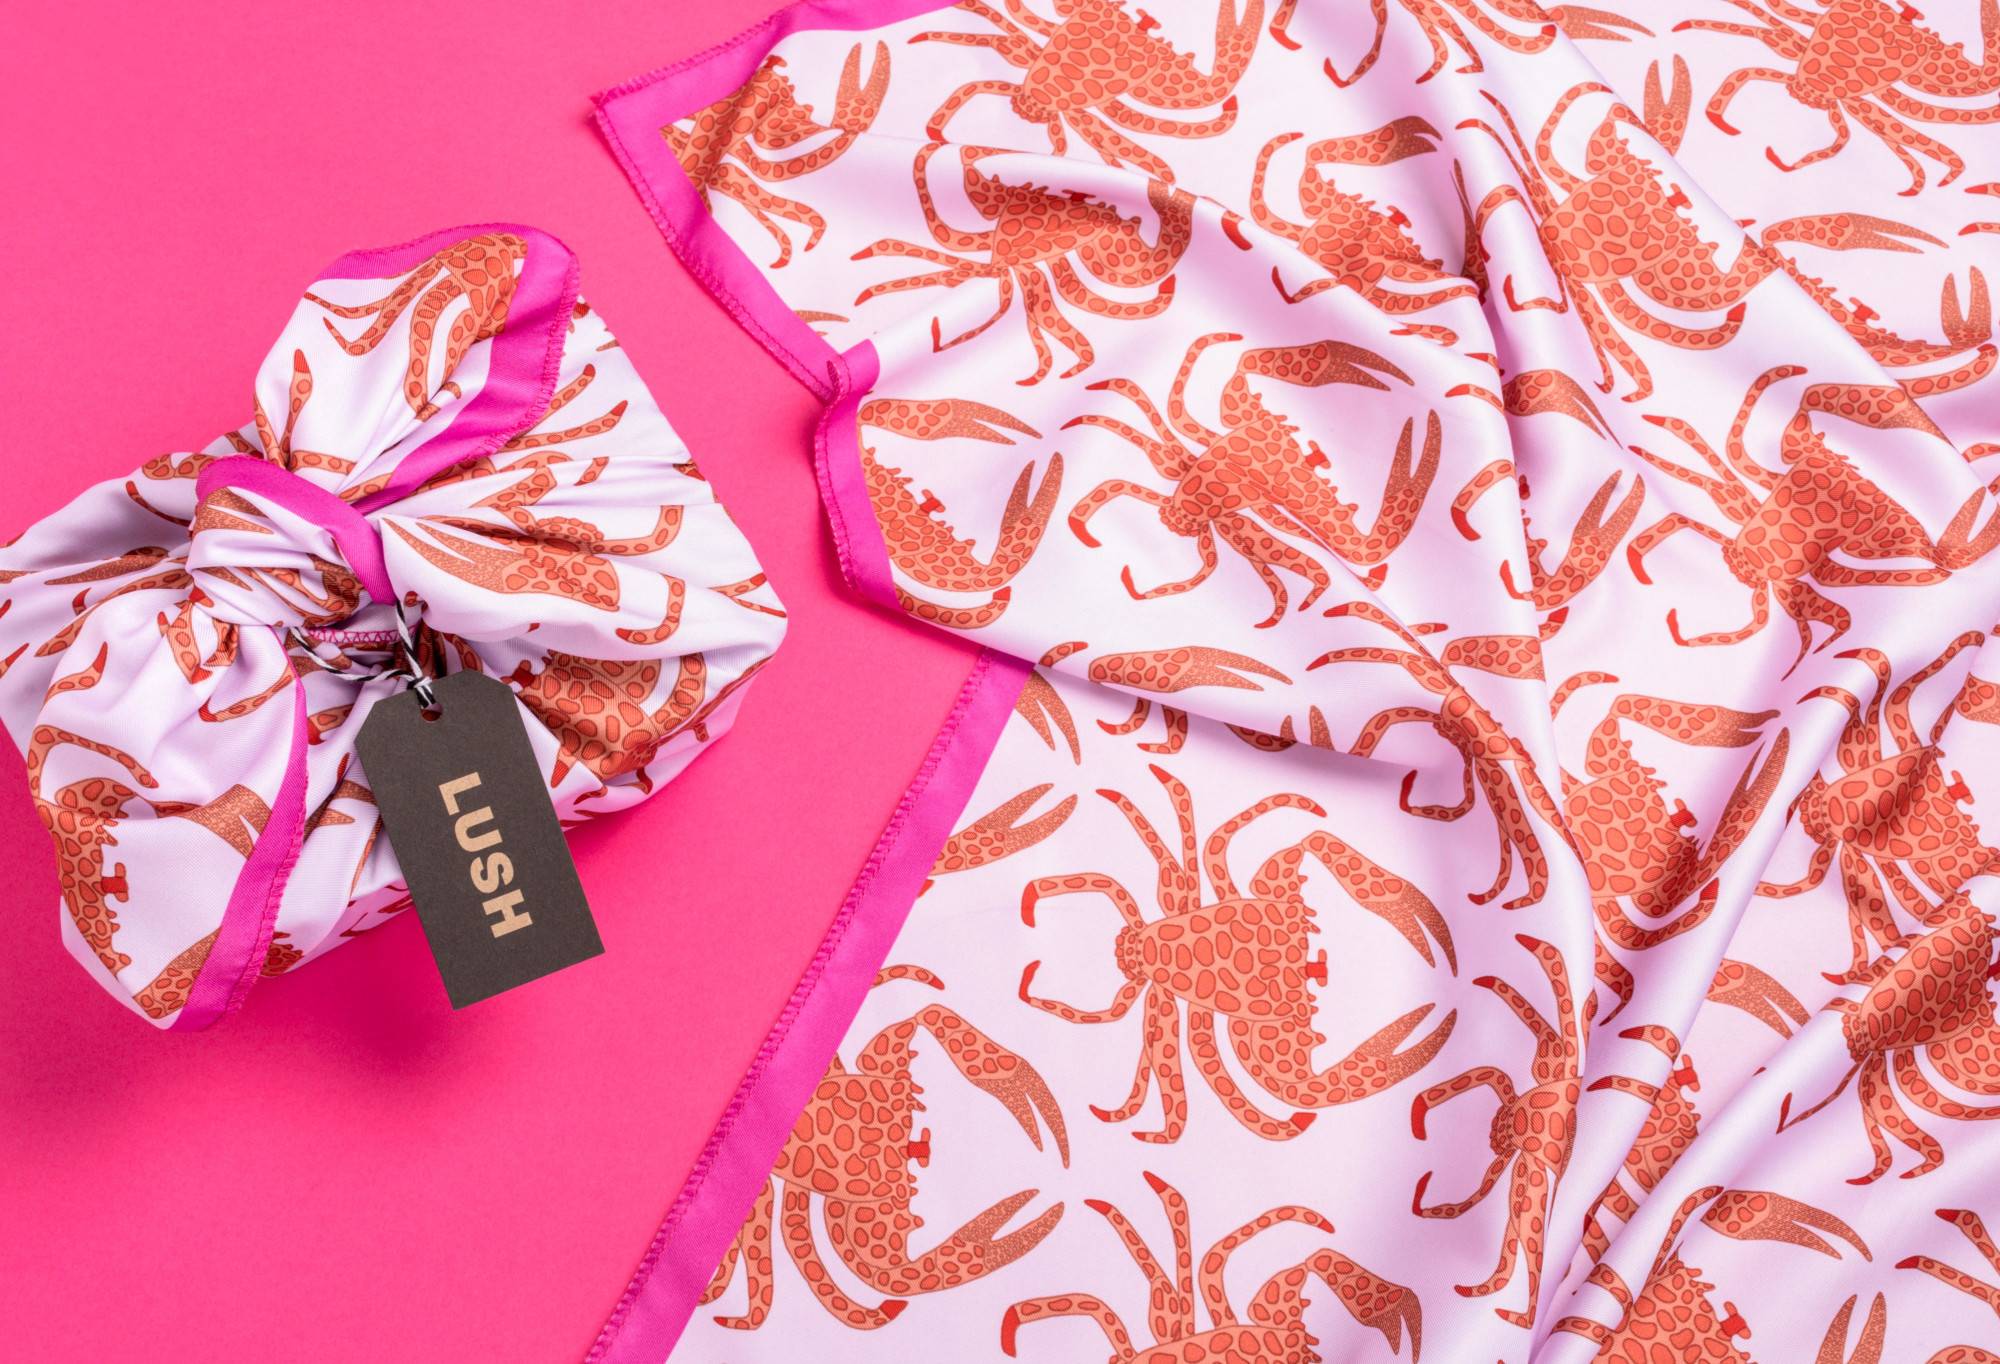 The knot wrap is wrapped around a rectangular box with a tag, as well as laid out flat, on a bright pink background.